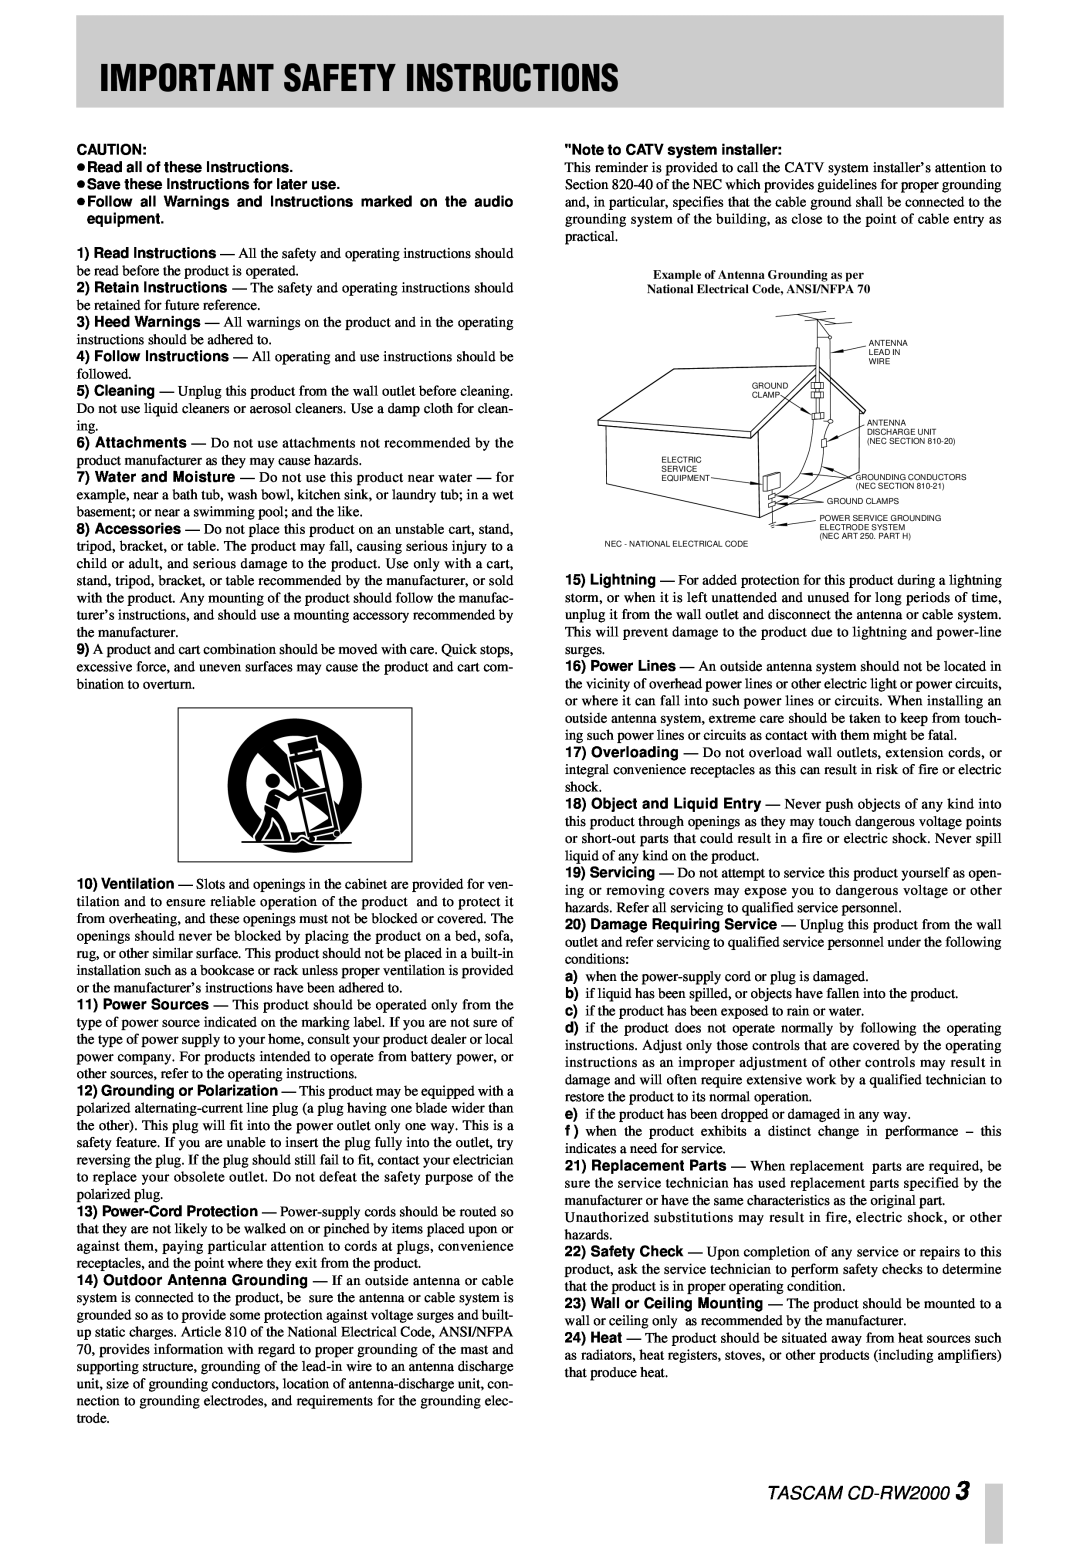 Tascam owner manual Important Safety Instructions, TASCAM CD-RW2000 